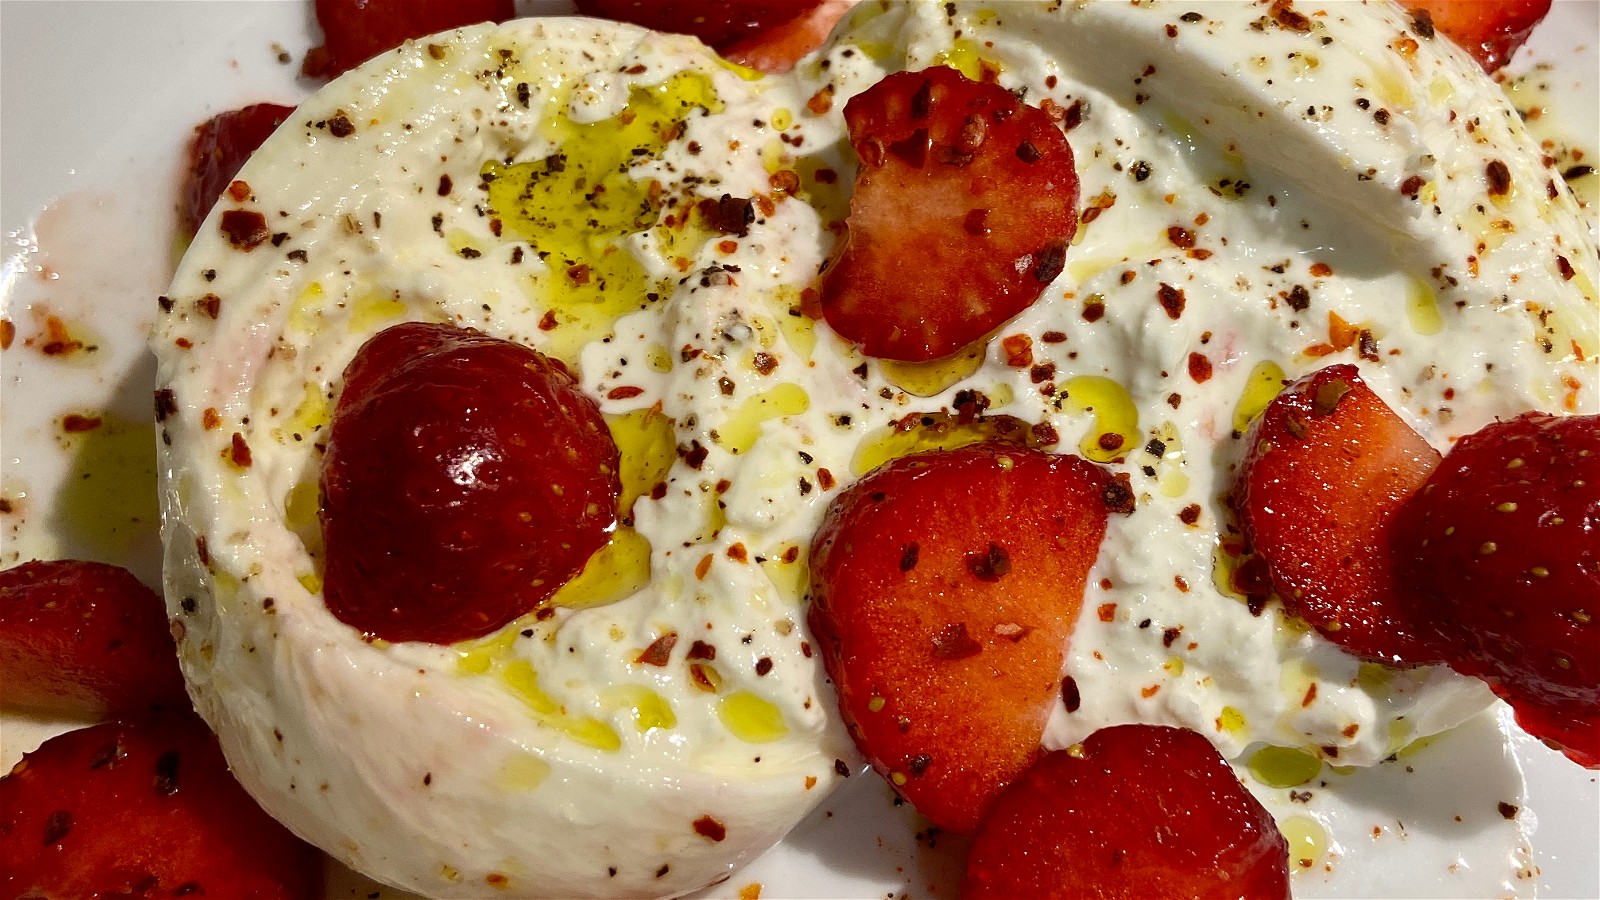 Image of Burrata and Berries with Biancolilla 